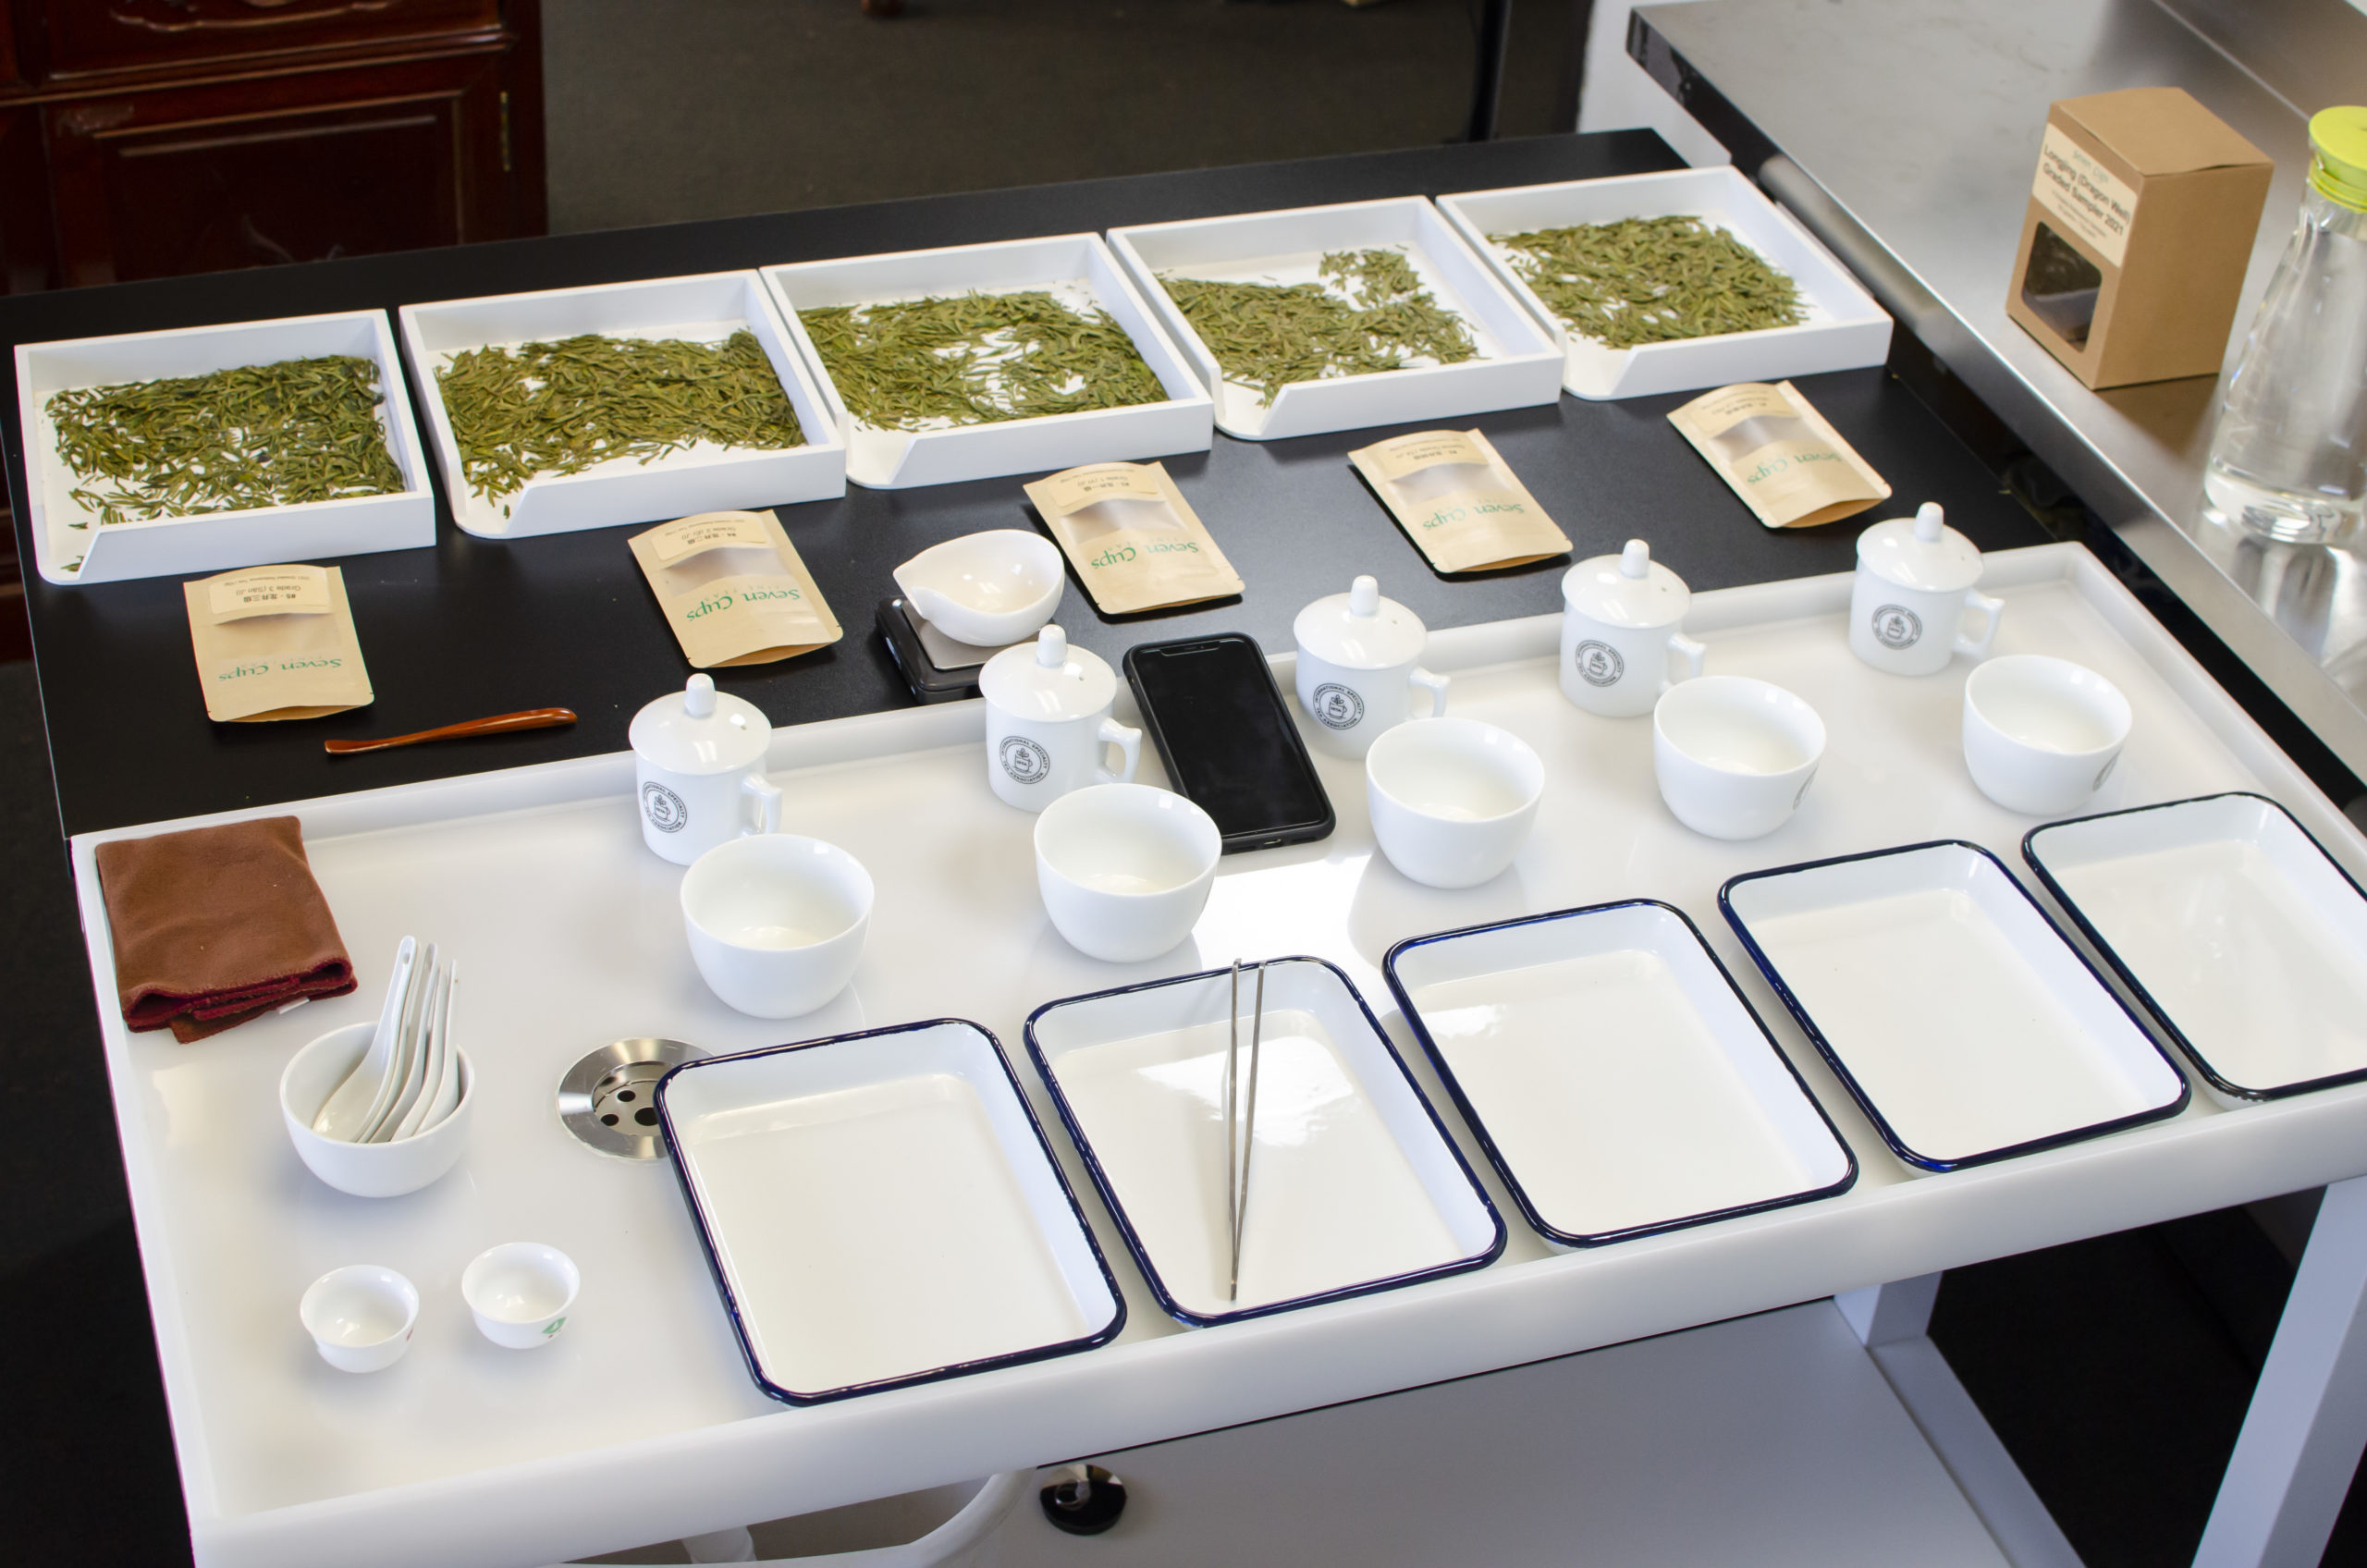 A tea judging setup spread out on a table, including an examination box for dry leaves, a brewing vessel, a bowl to pour tea into, and a tray for examining wet leaves for each of the five teas.